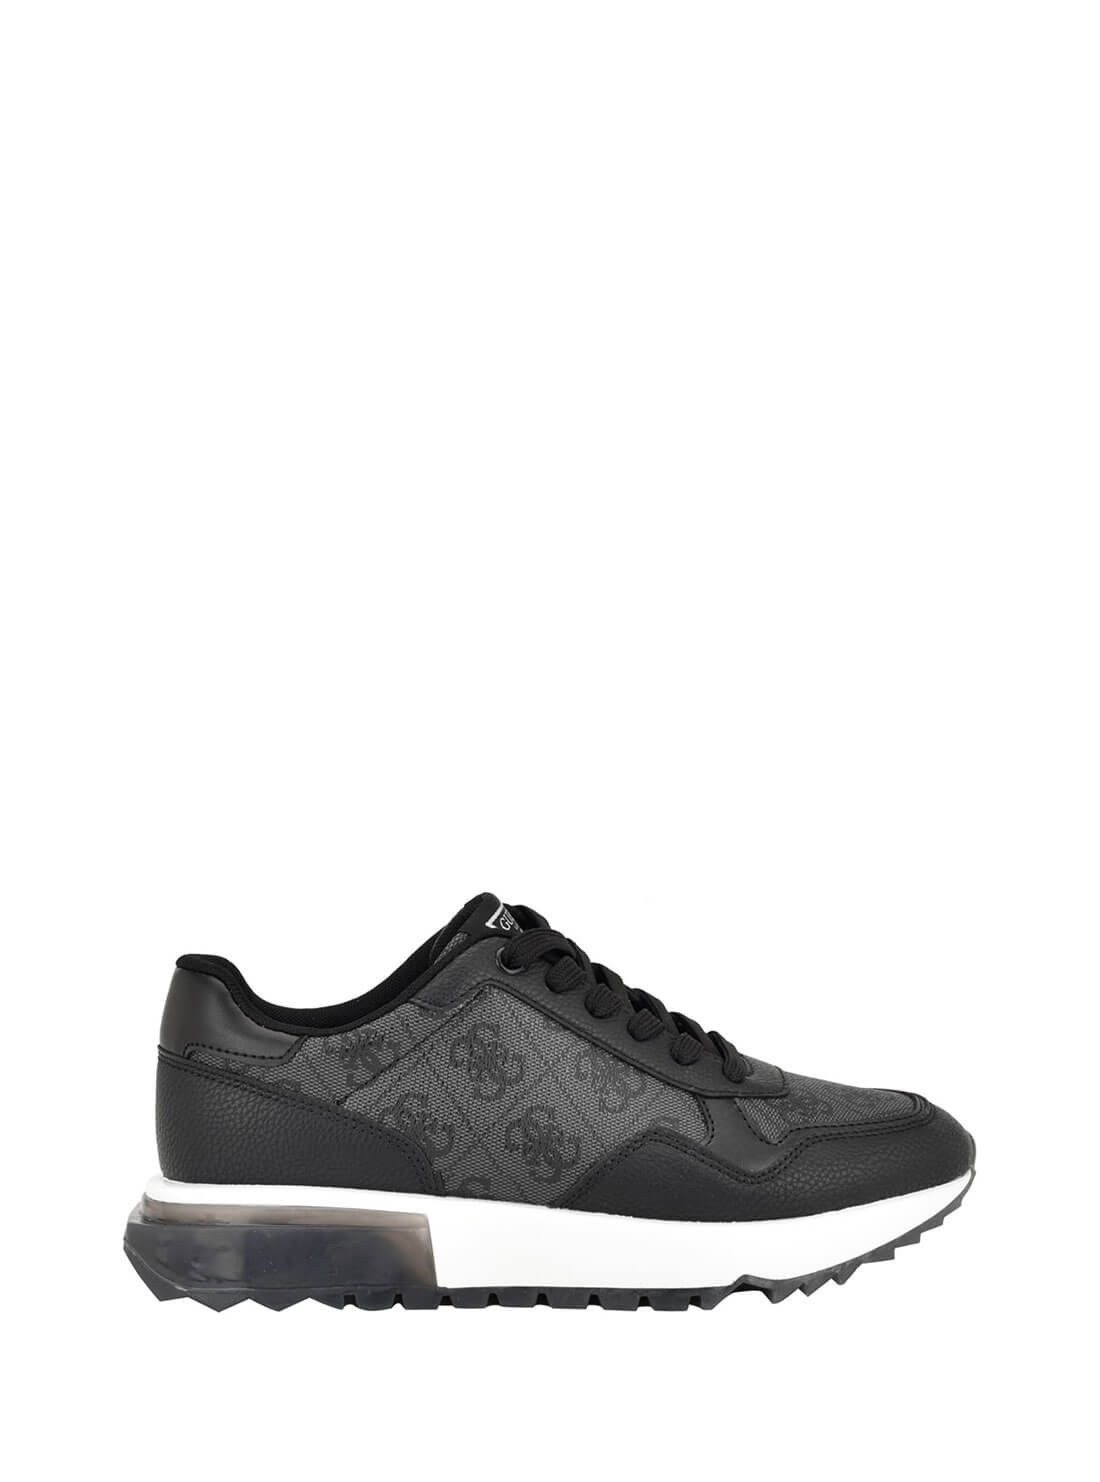 Black Melany Sneakers | GUESS Women's Shoes | side view